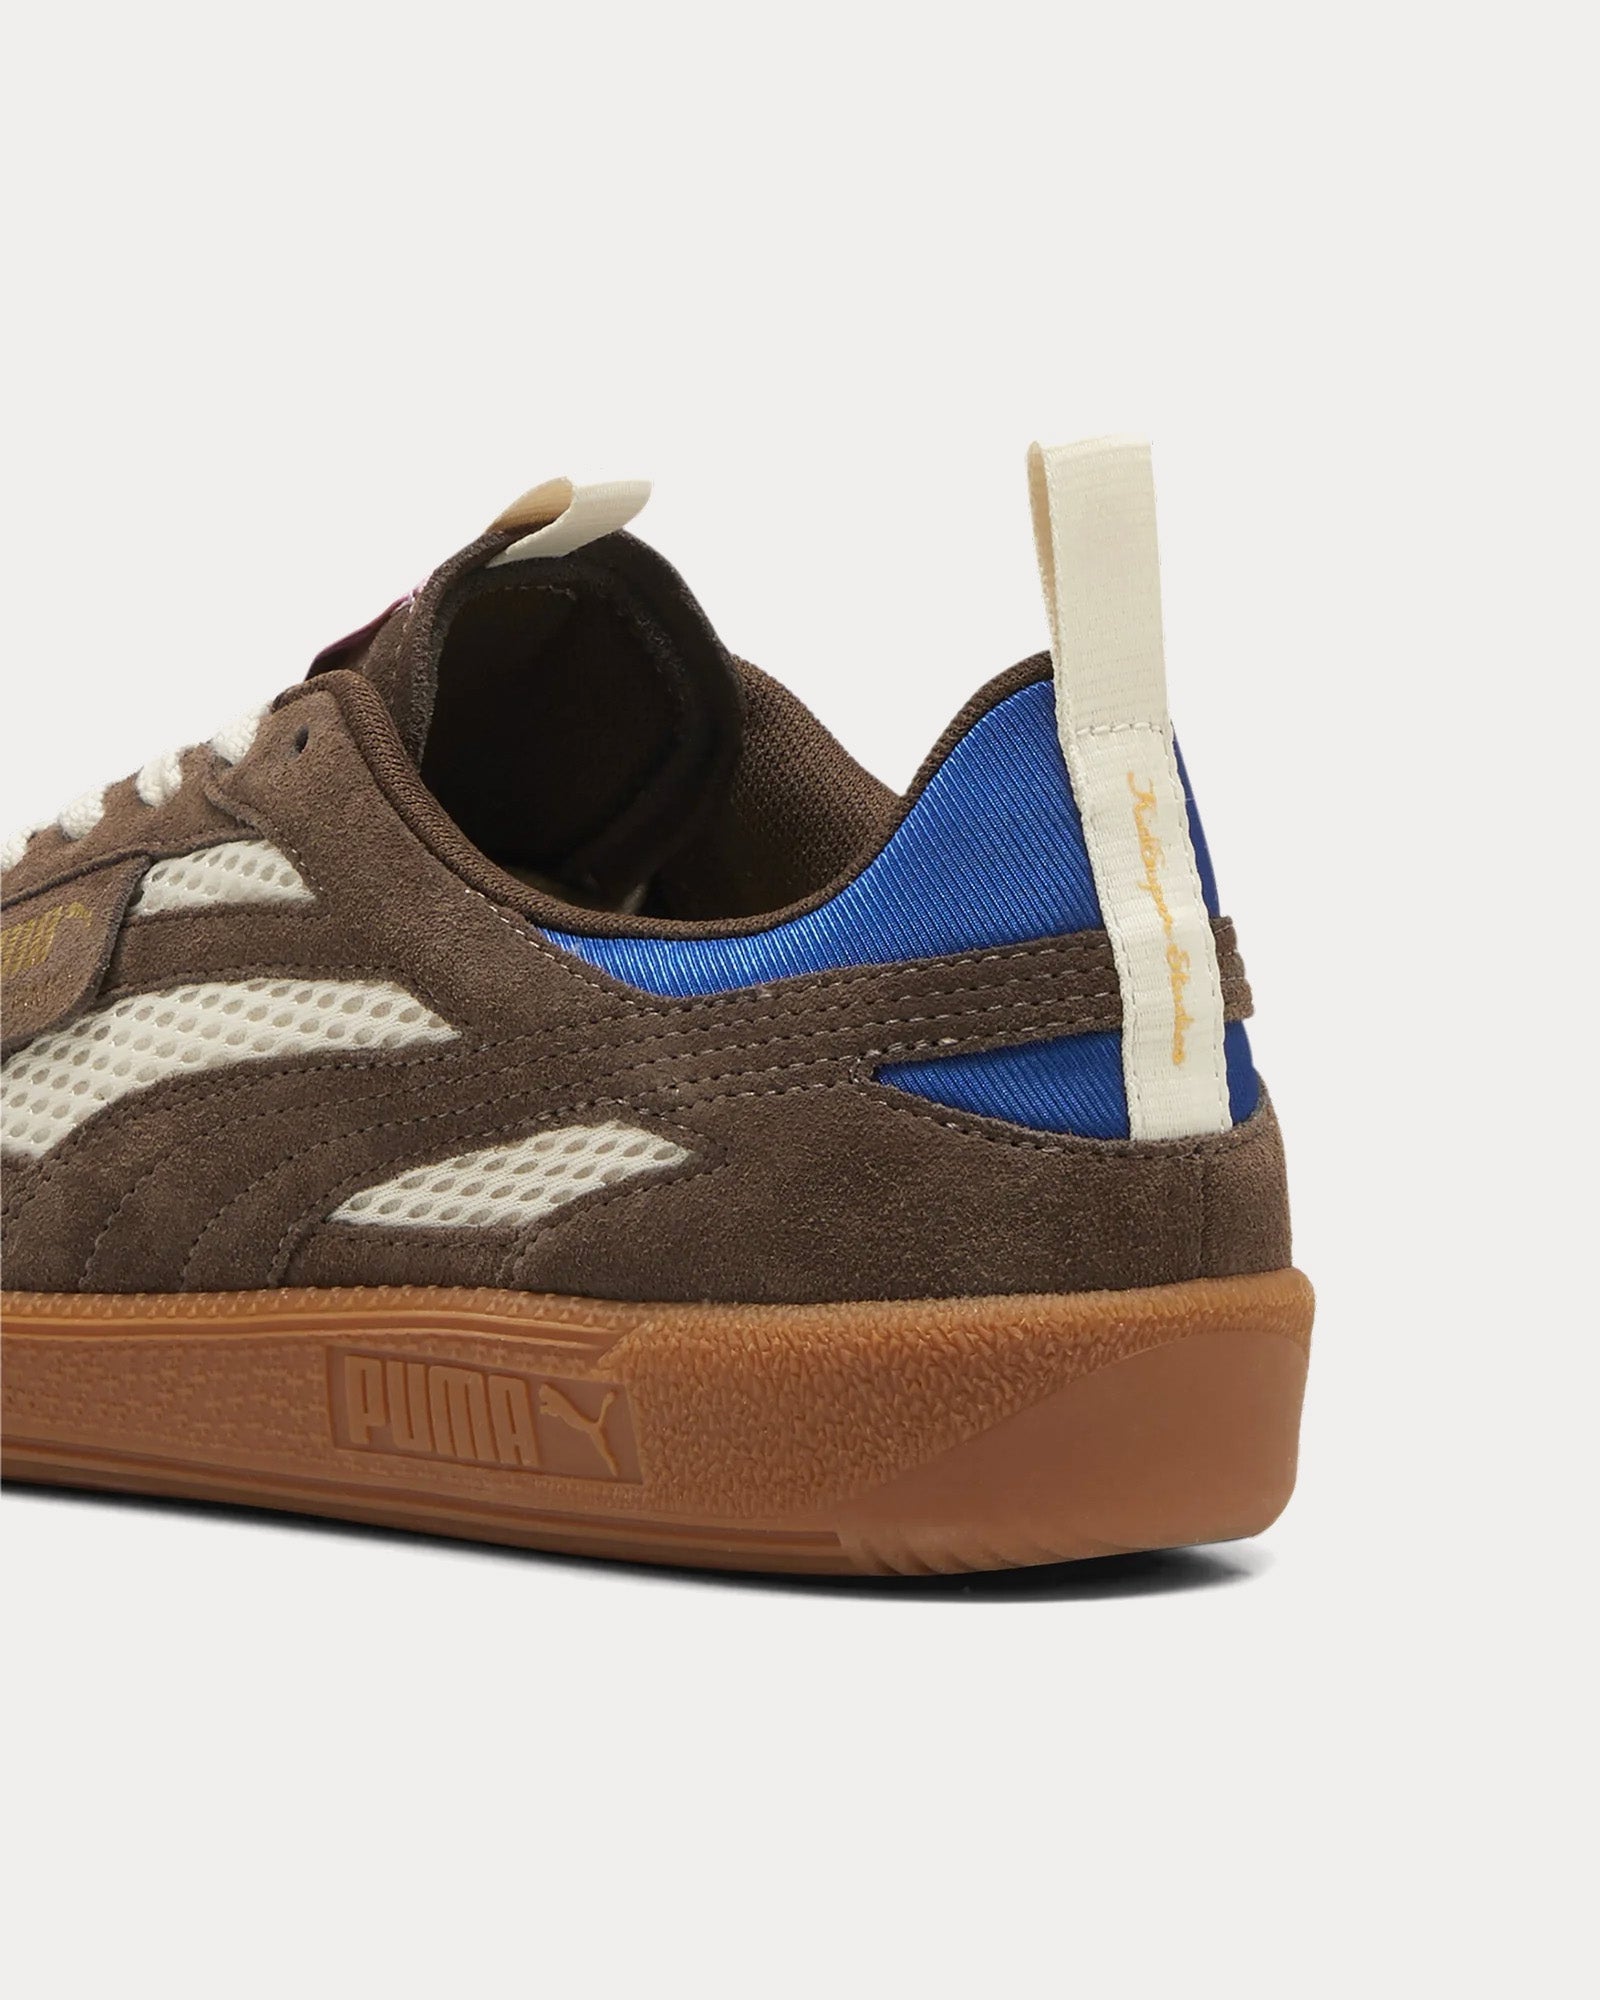 Puma x Kidsuper - Palermo Flaxen / Mauved Out Low Top Sneakers